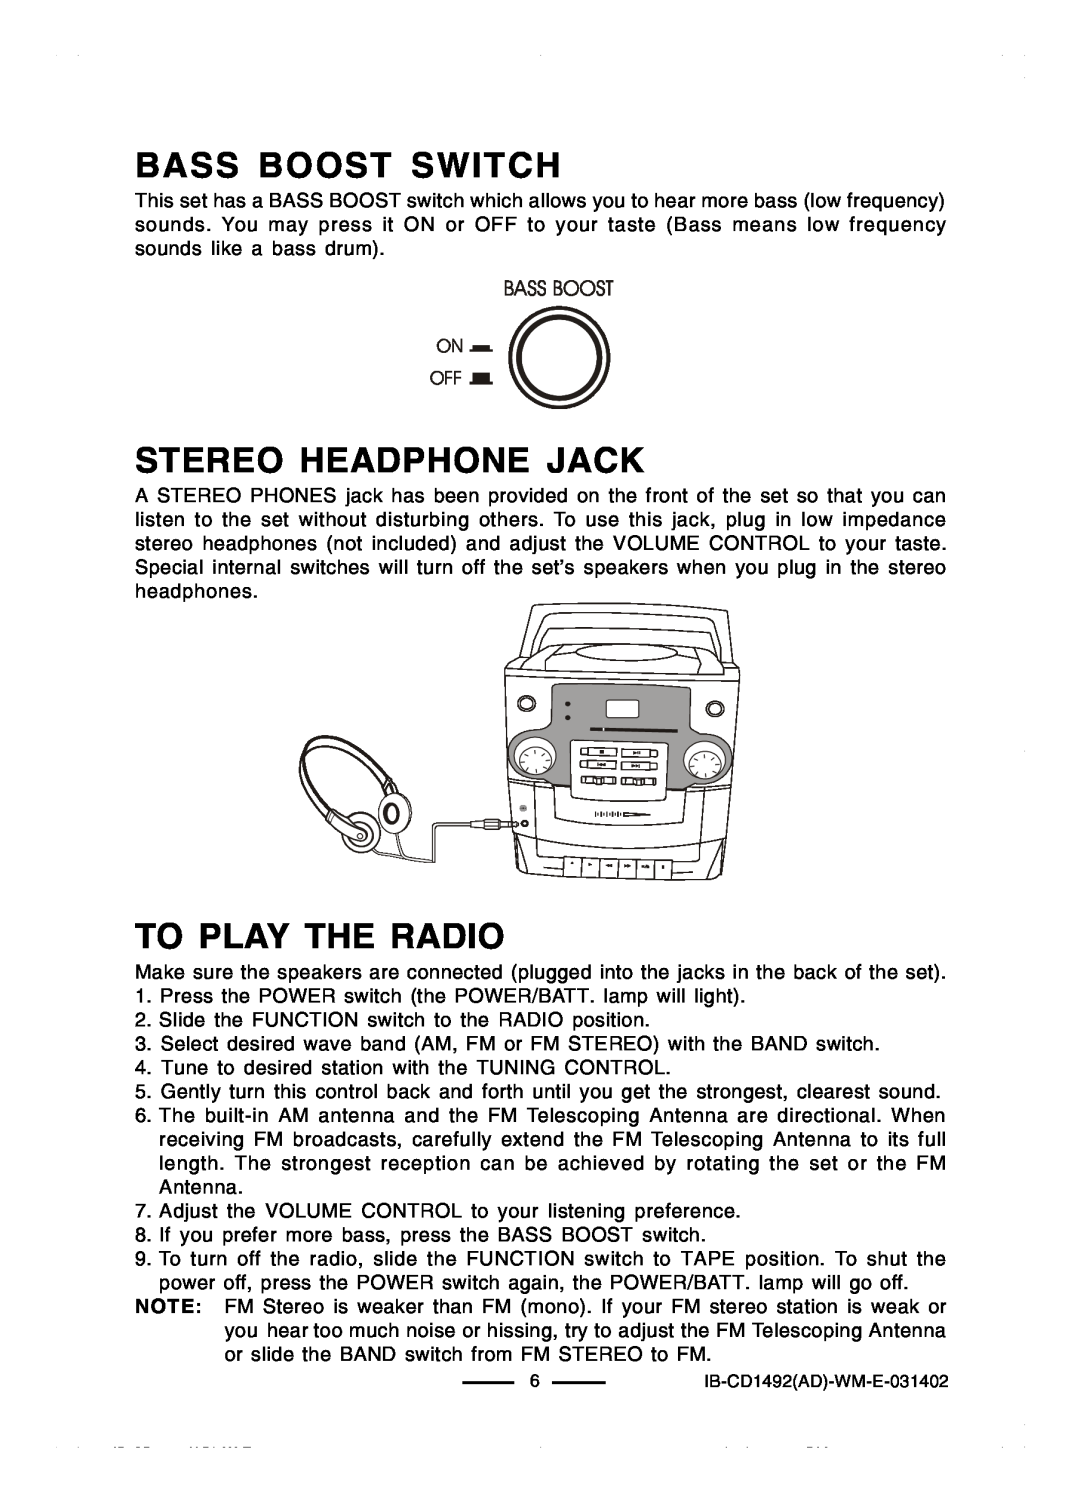 Lenoxx Electronics CD-1492 operating instructions Bass Boost Switch, Stereo Headphone Jack, To Play The Radio 